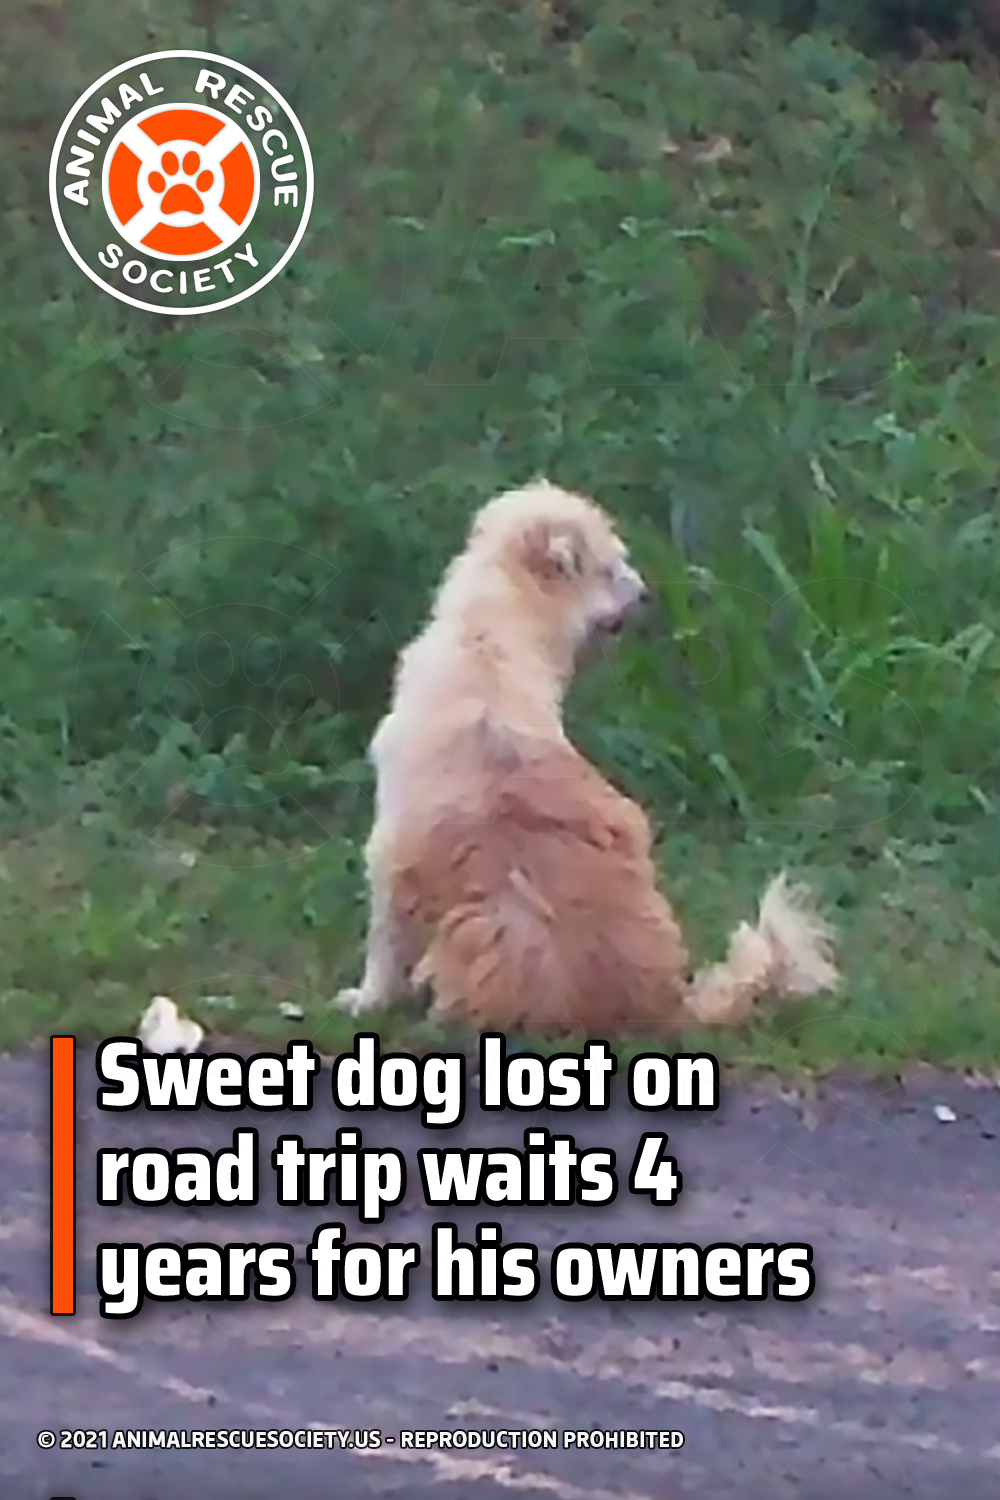 Sweet dog lost on road trip waits 4 years for his owners